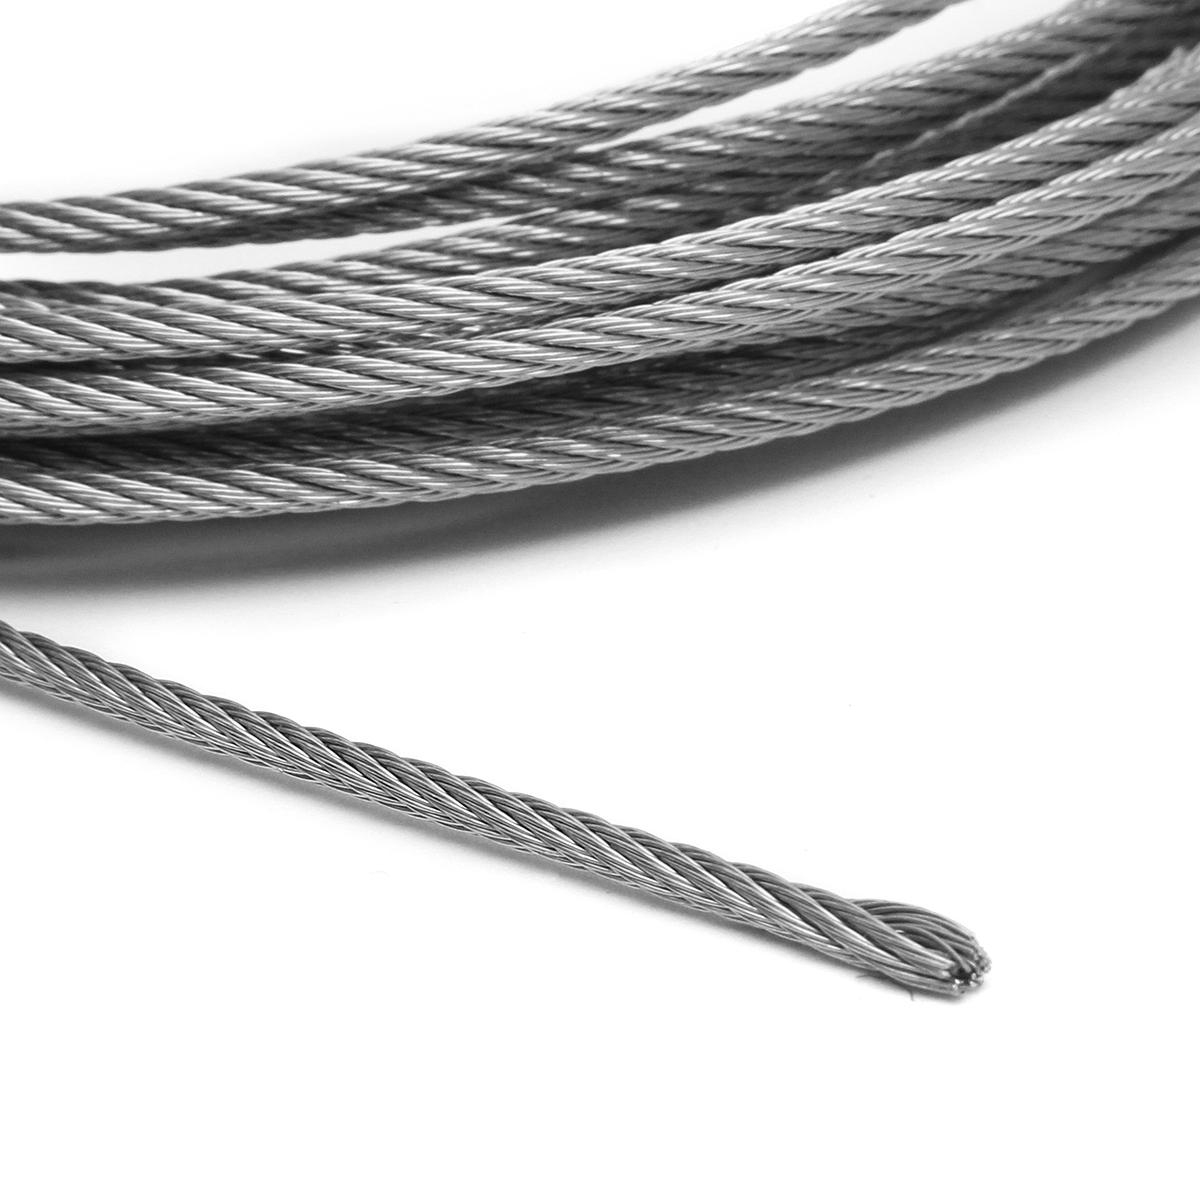 3mm-Stainless-Steel-Wire-Rope-Tensile-Diameter-Structure-Cable-1256987-4